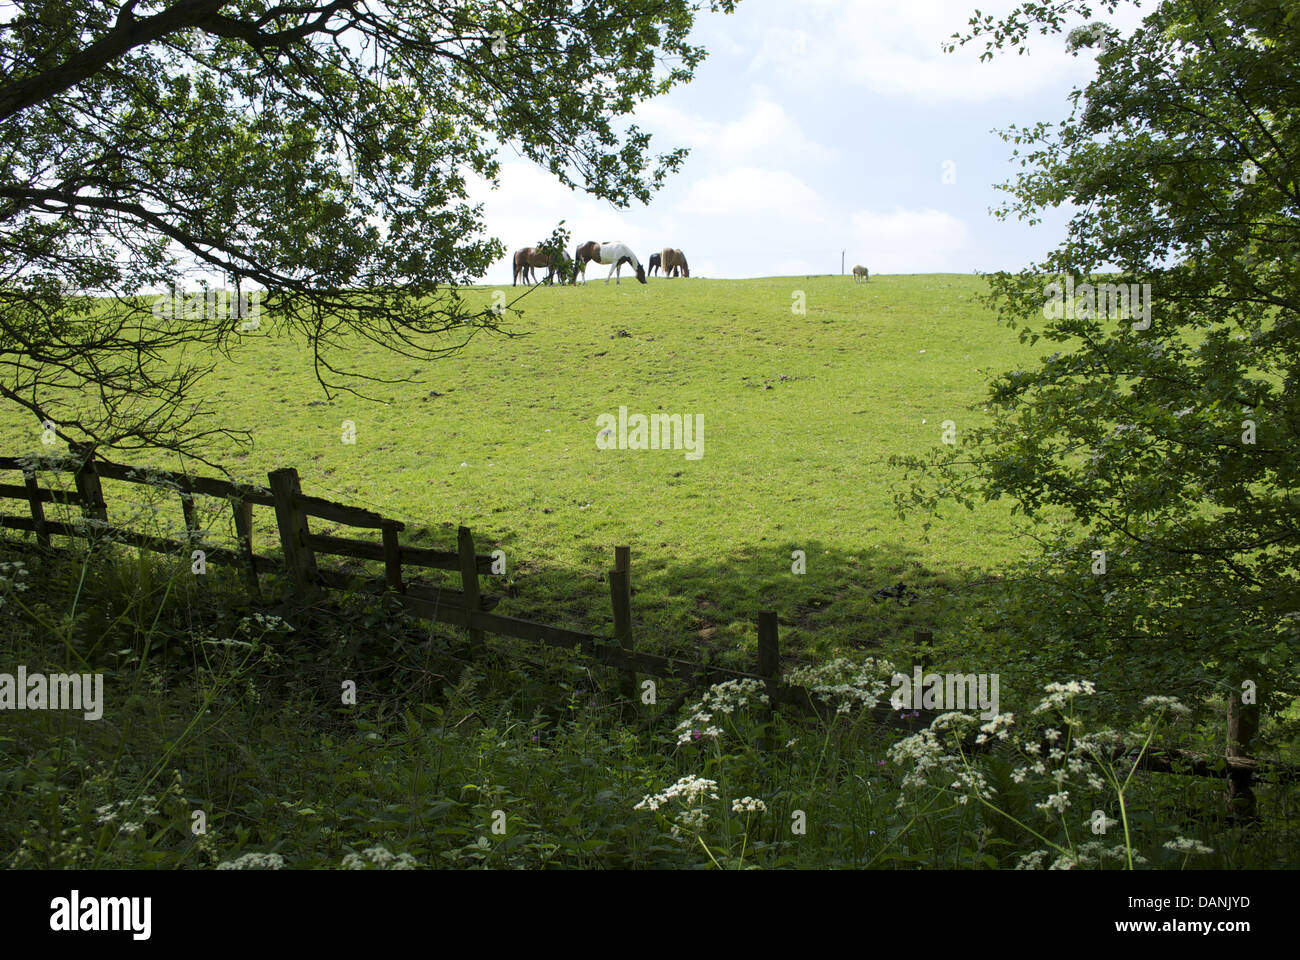 View of horses in distance across field with old broken wooden fence in foreground Stock Photo